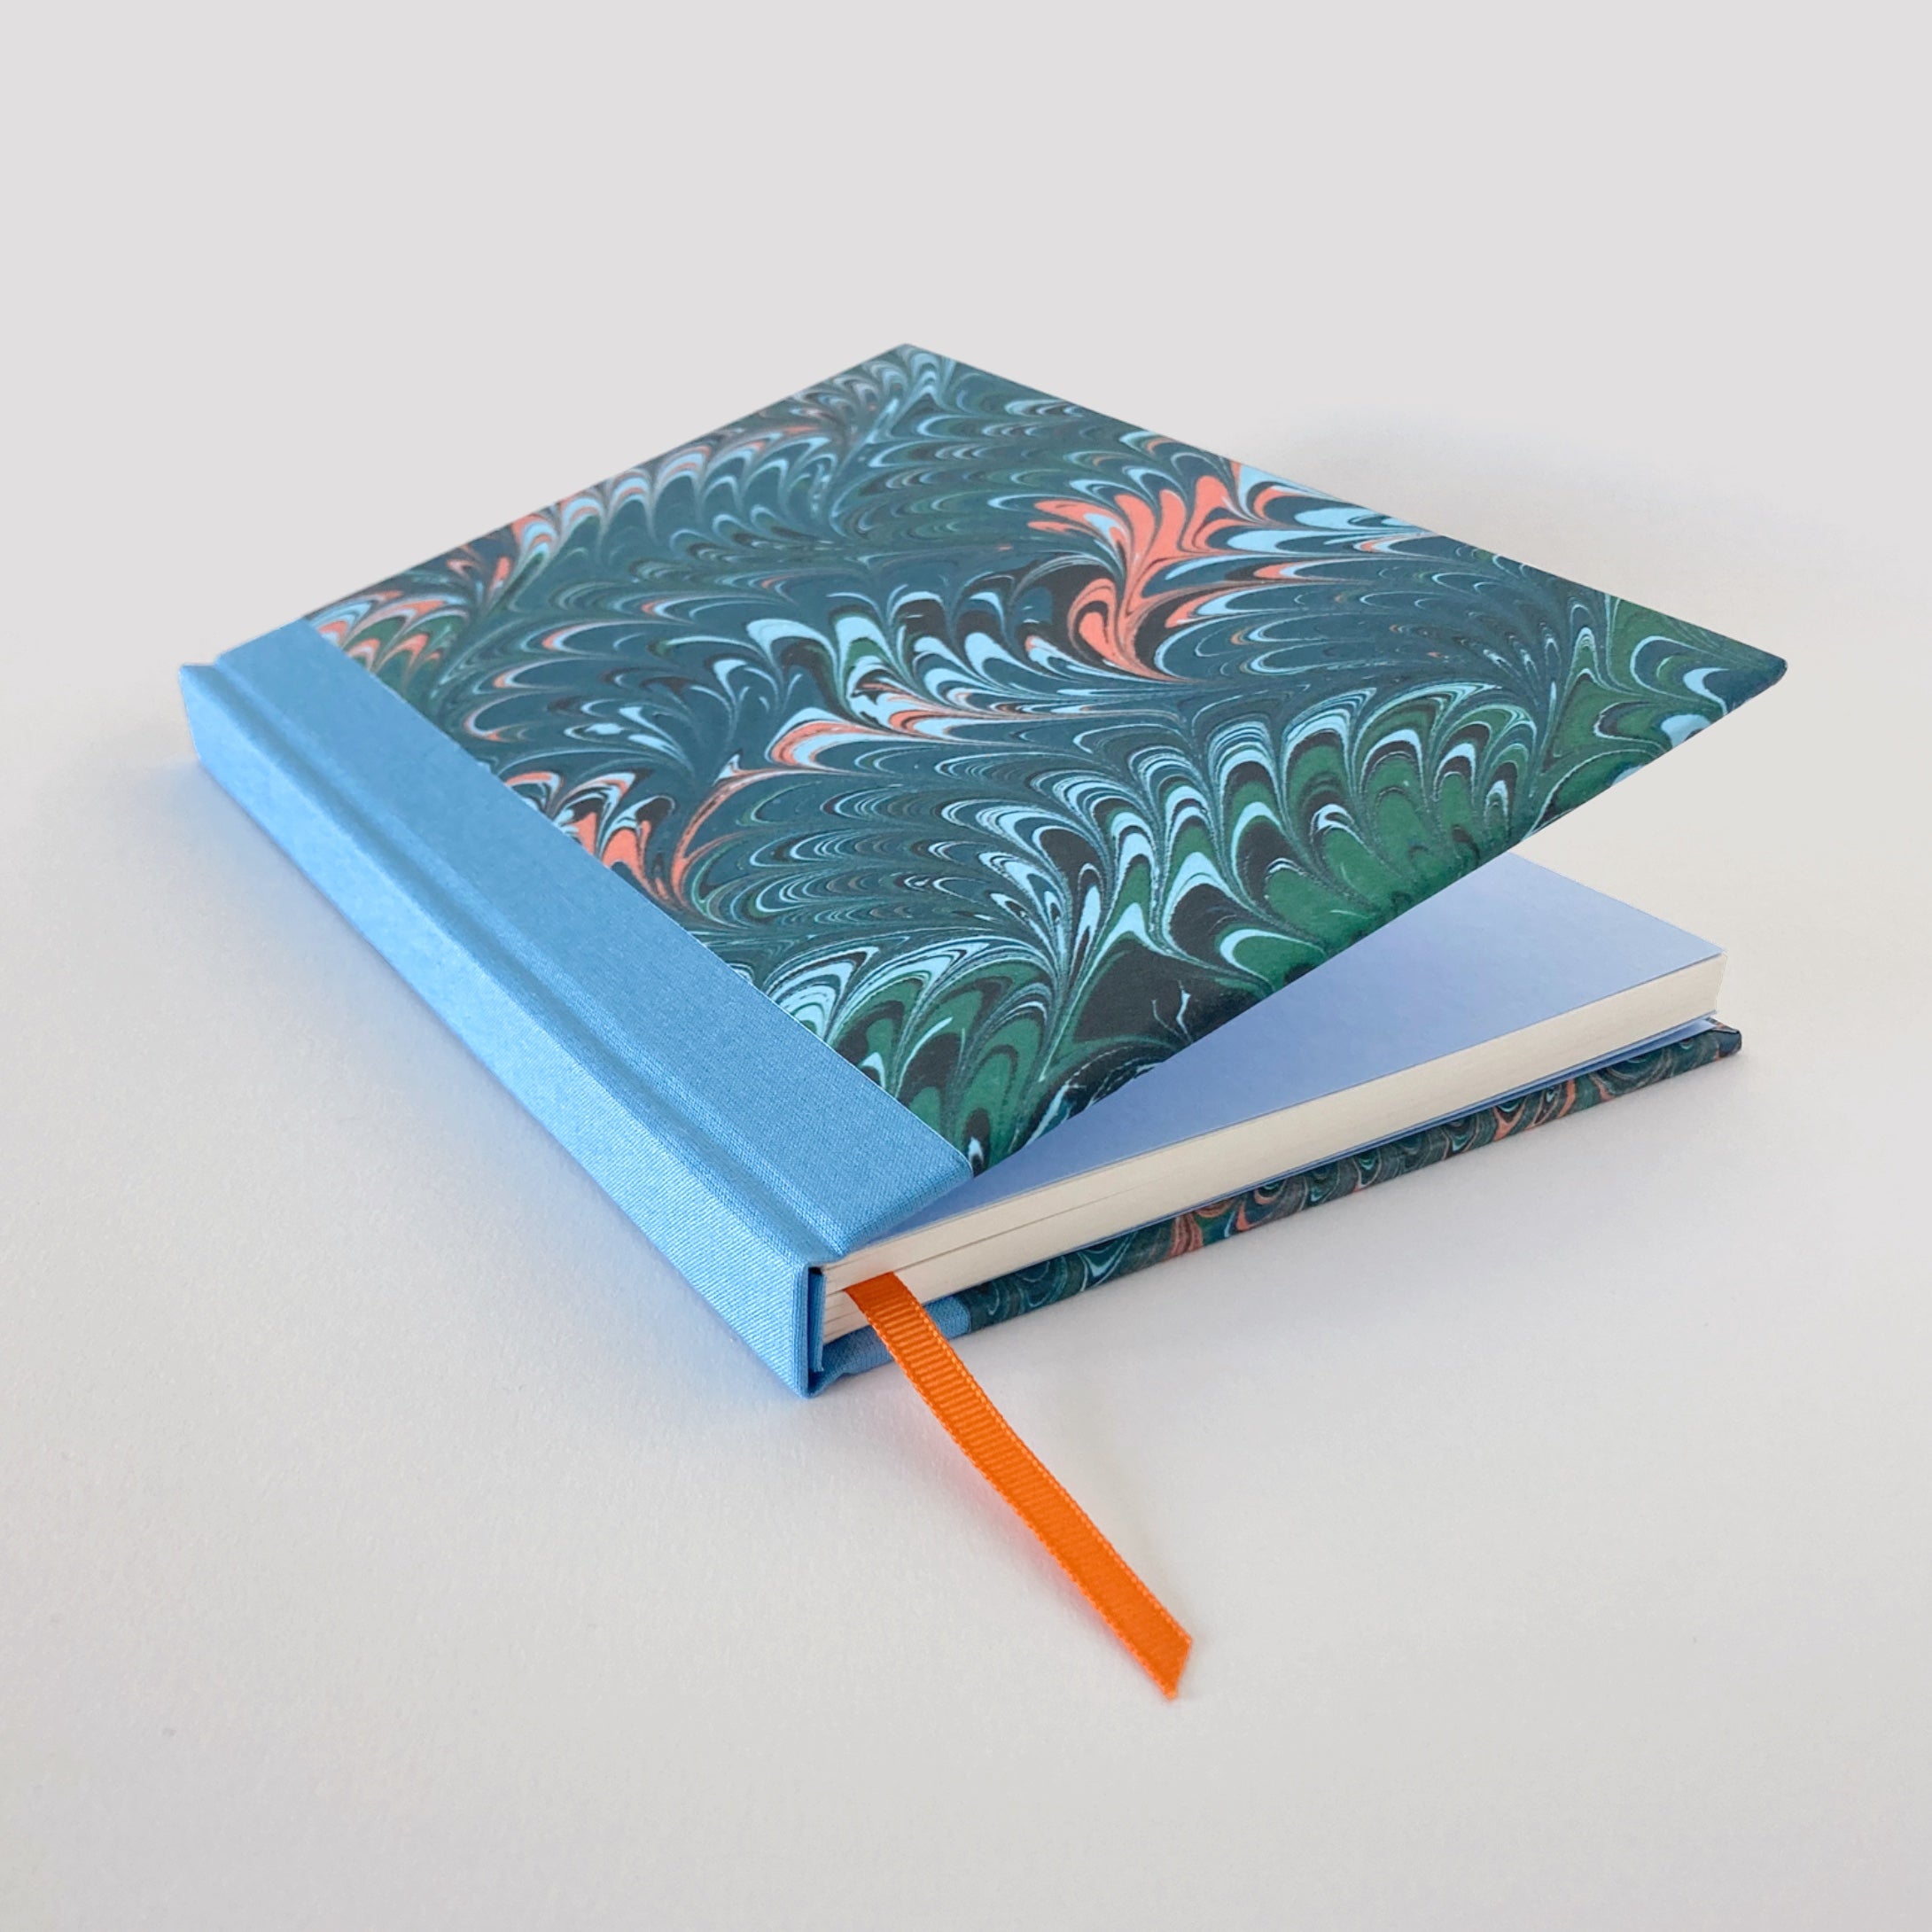 Green marble hardback notebook partially open, revealing blue end pages.